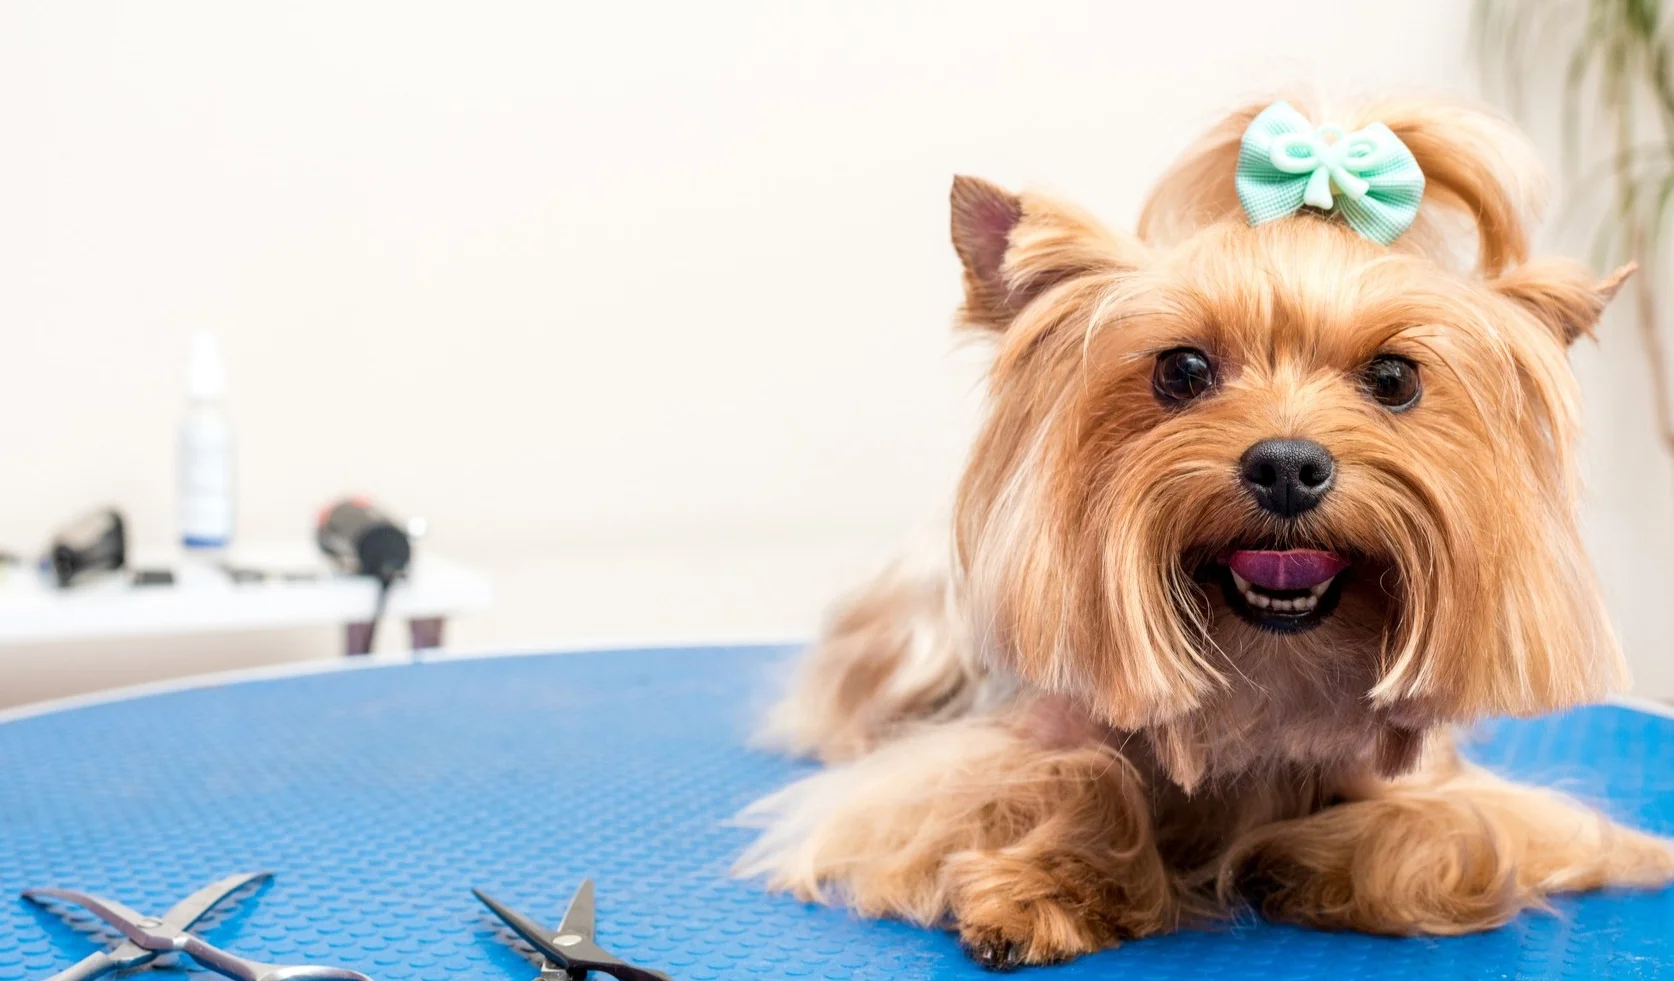 Lawrenceville Dog Grooming services